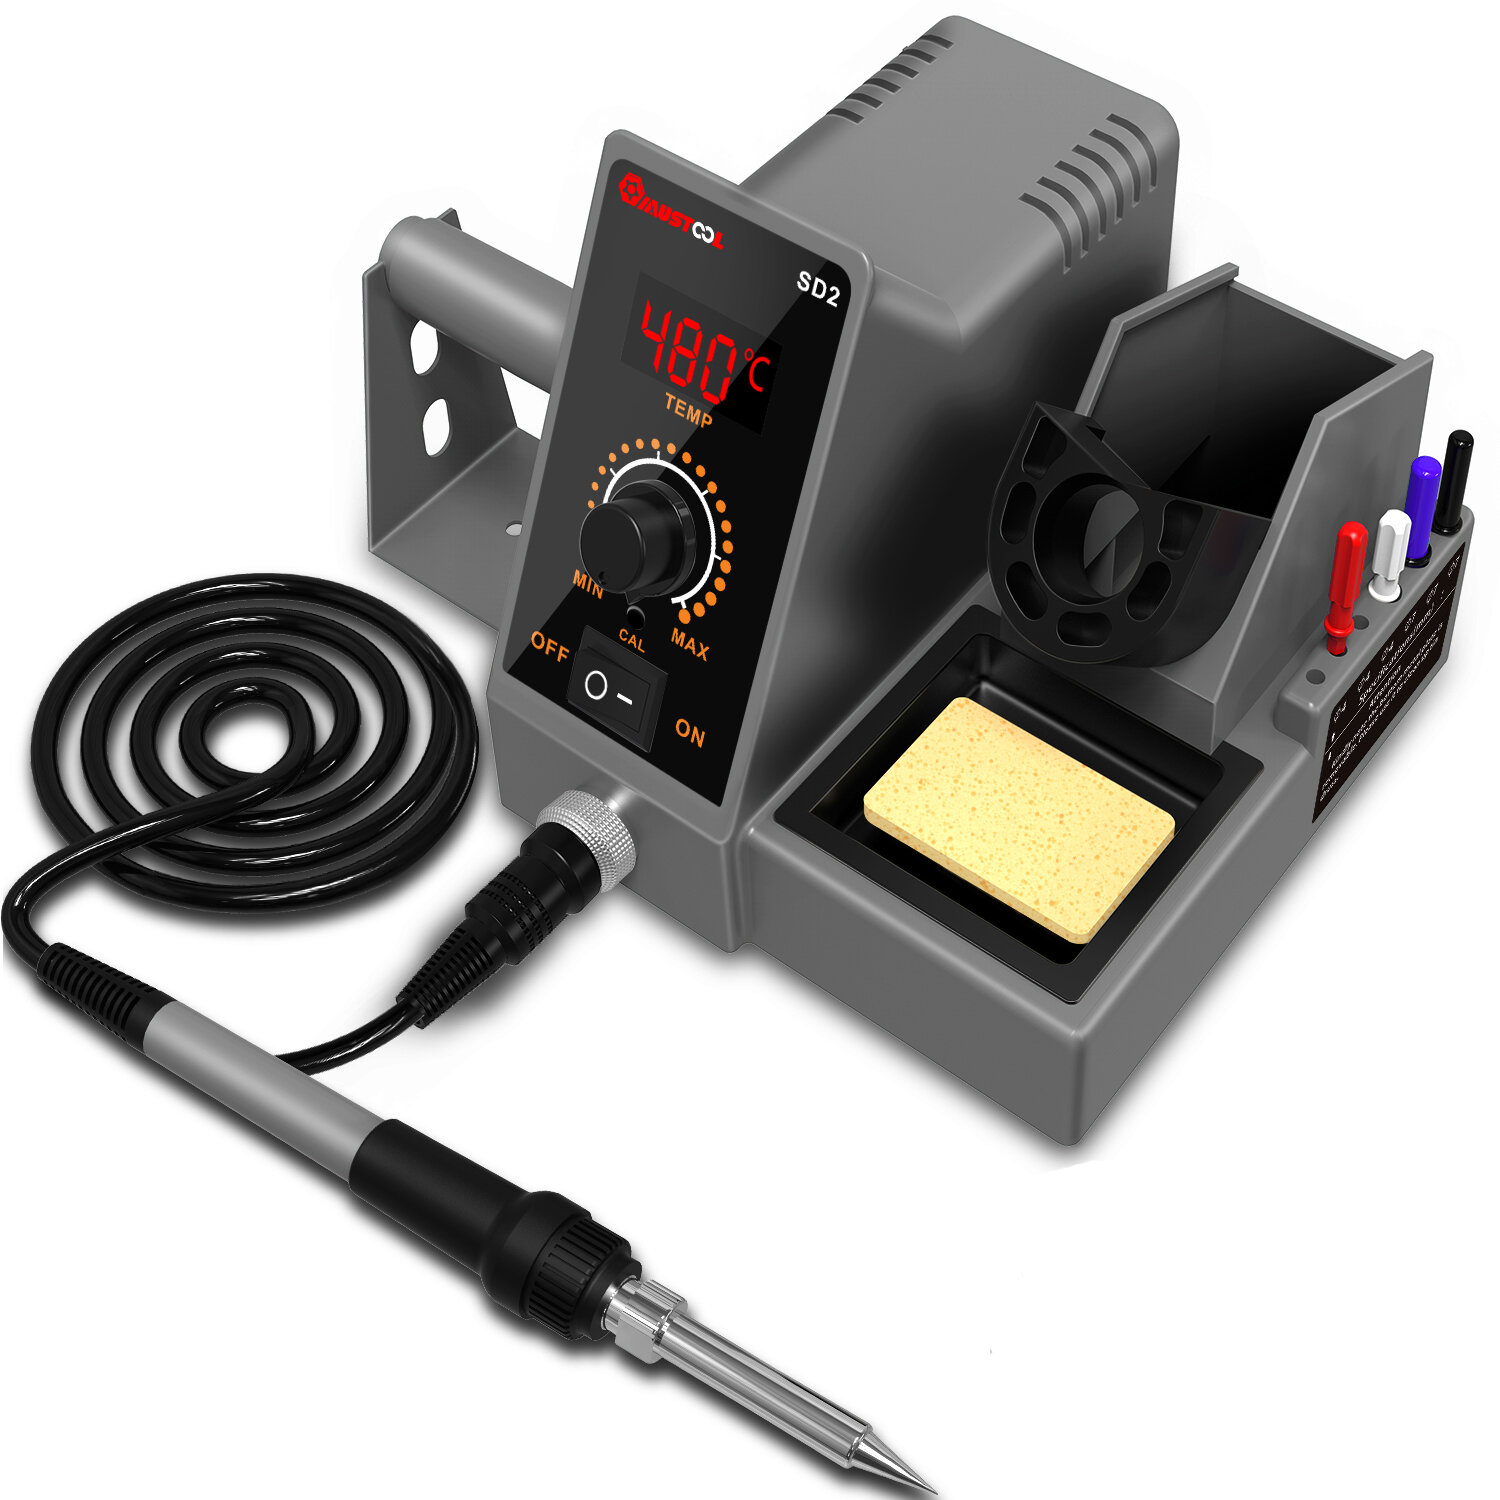 MUSTOOL SD1 SD2 LCD 60W Soldering Station Professional PID Soldering Iron Station Tool Kit Adjustable Temperature 200-480°C with Solder Wire Holder Soldering Iron Holder & Screwdriver Slot